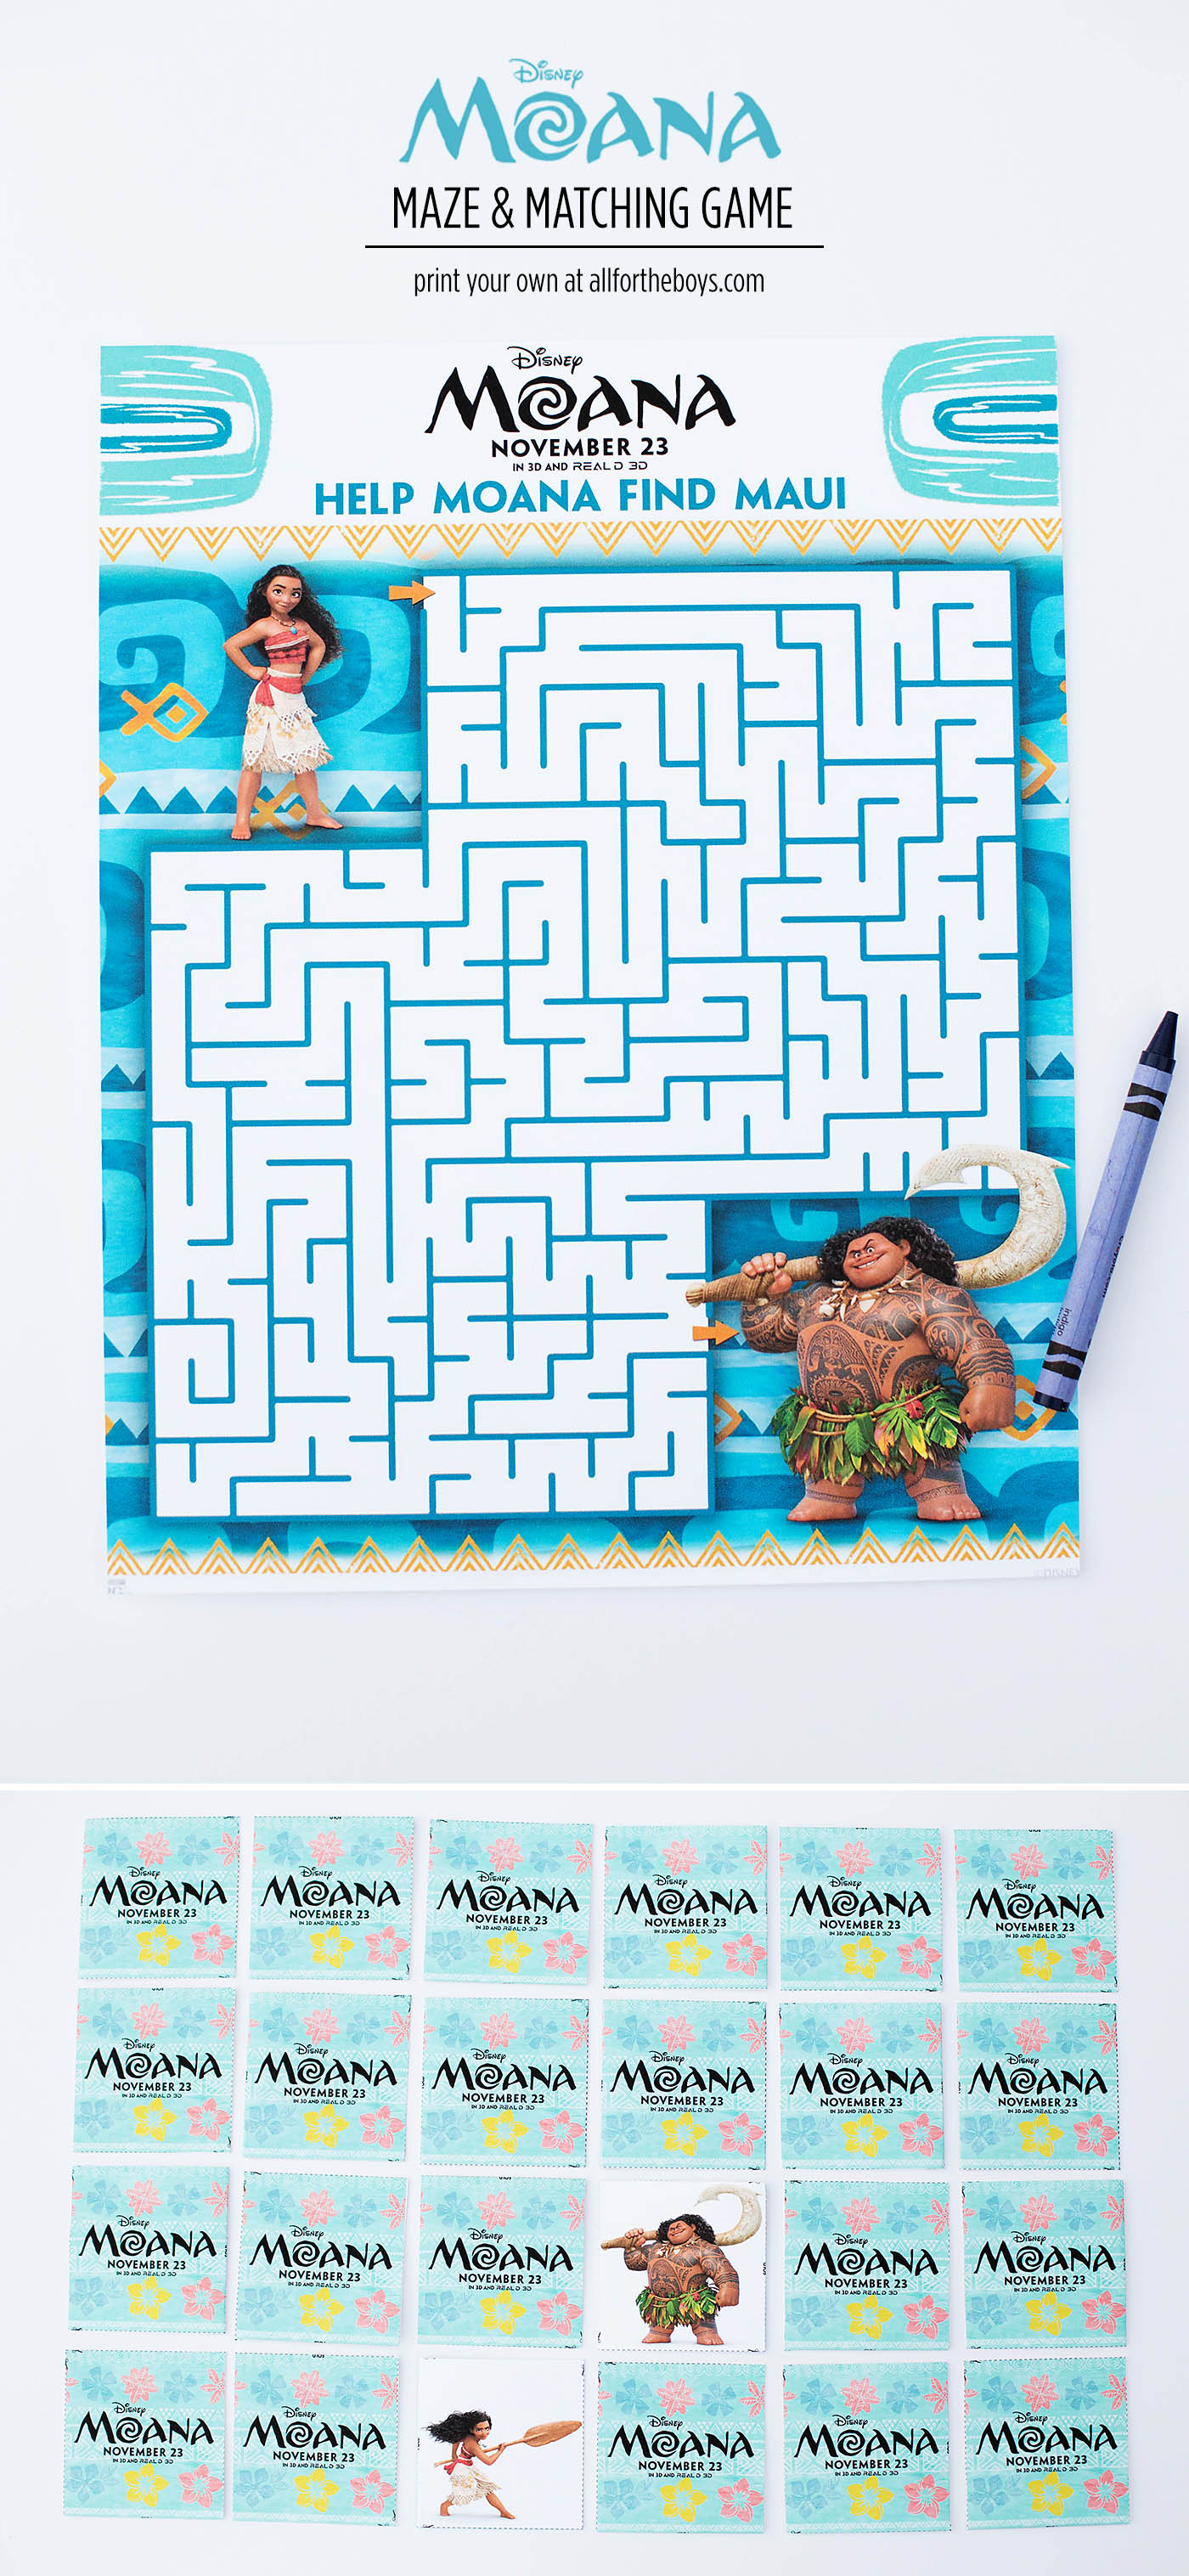 Moana printable coloring pages, bookmarks, maze and matching game!